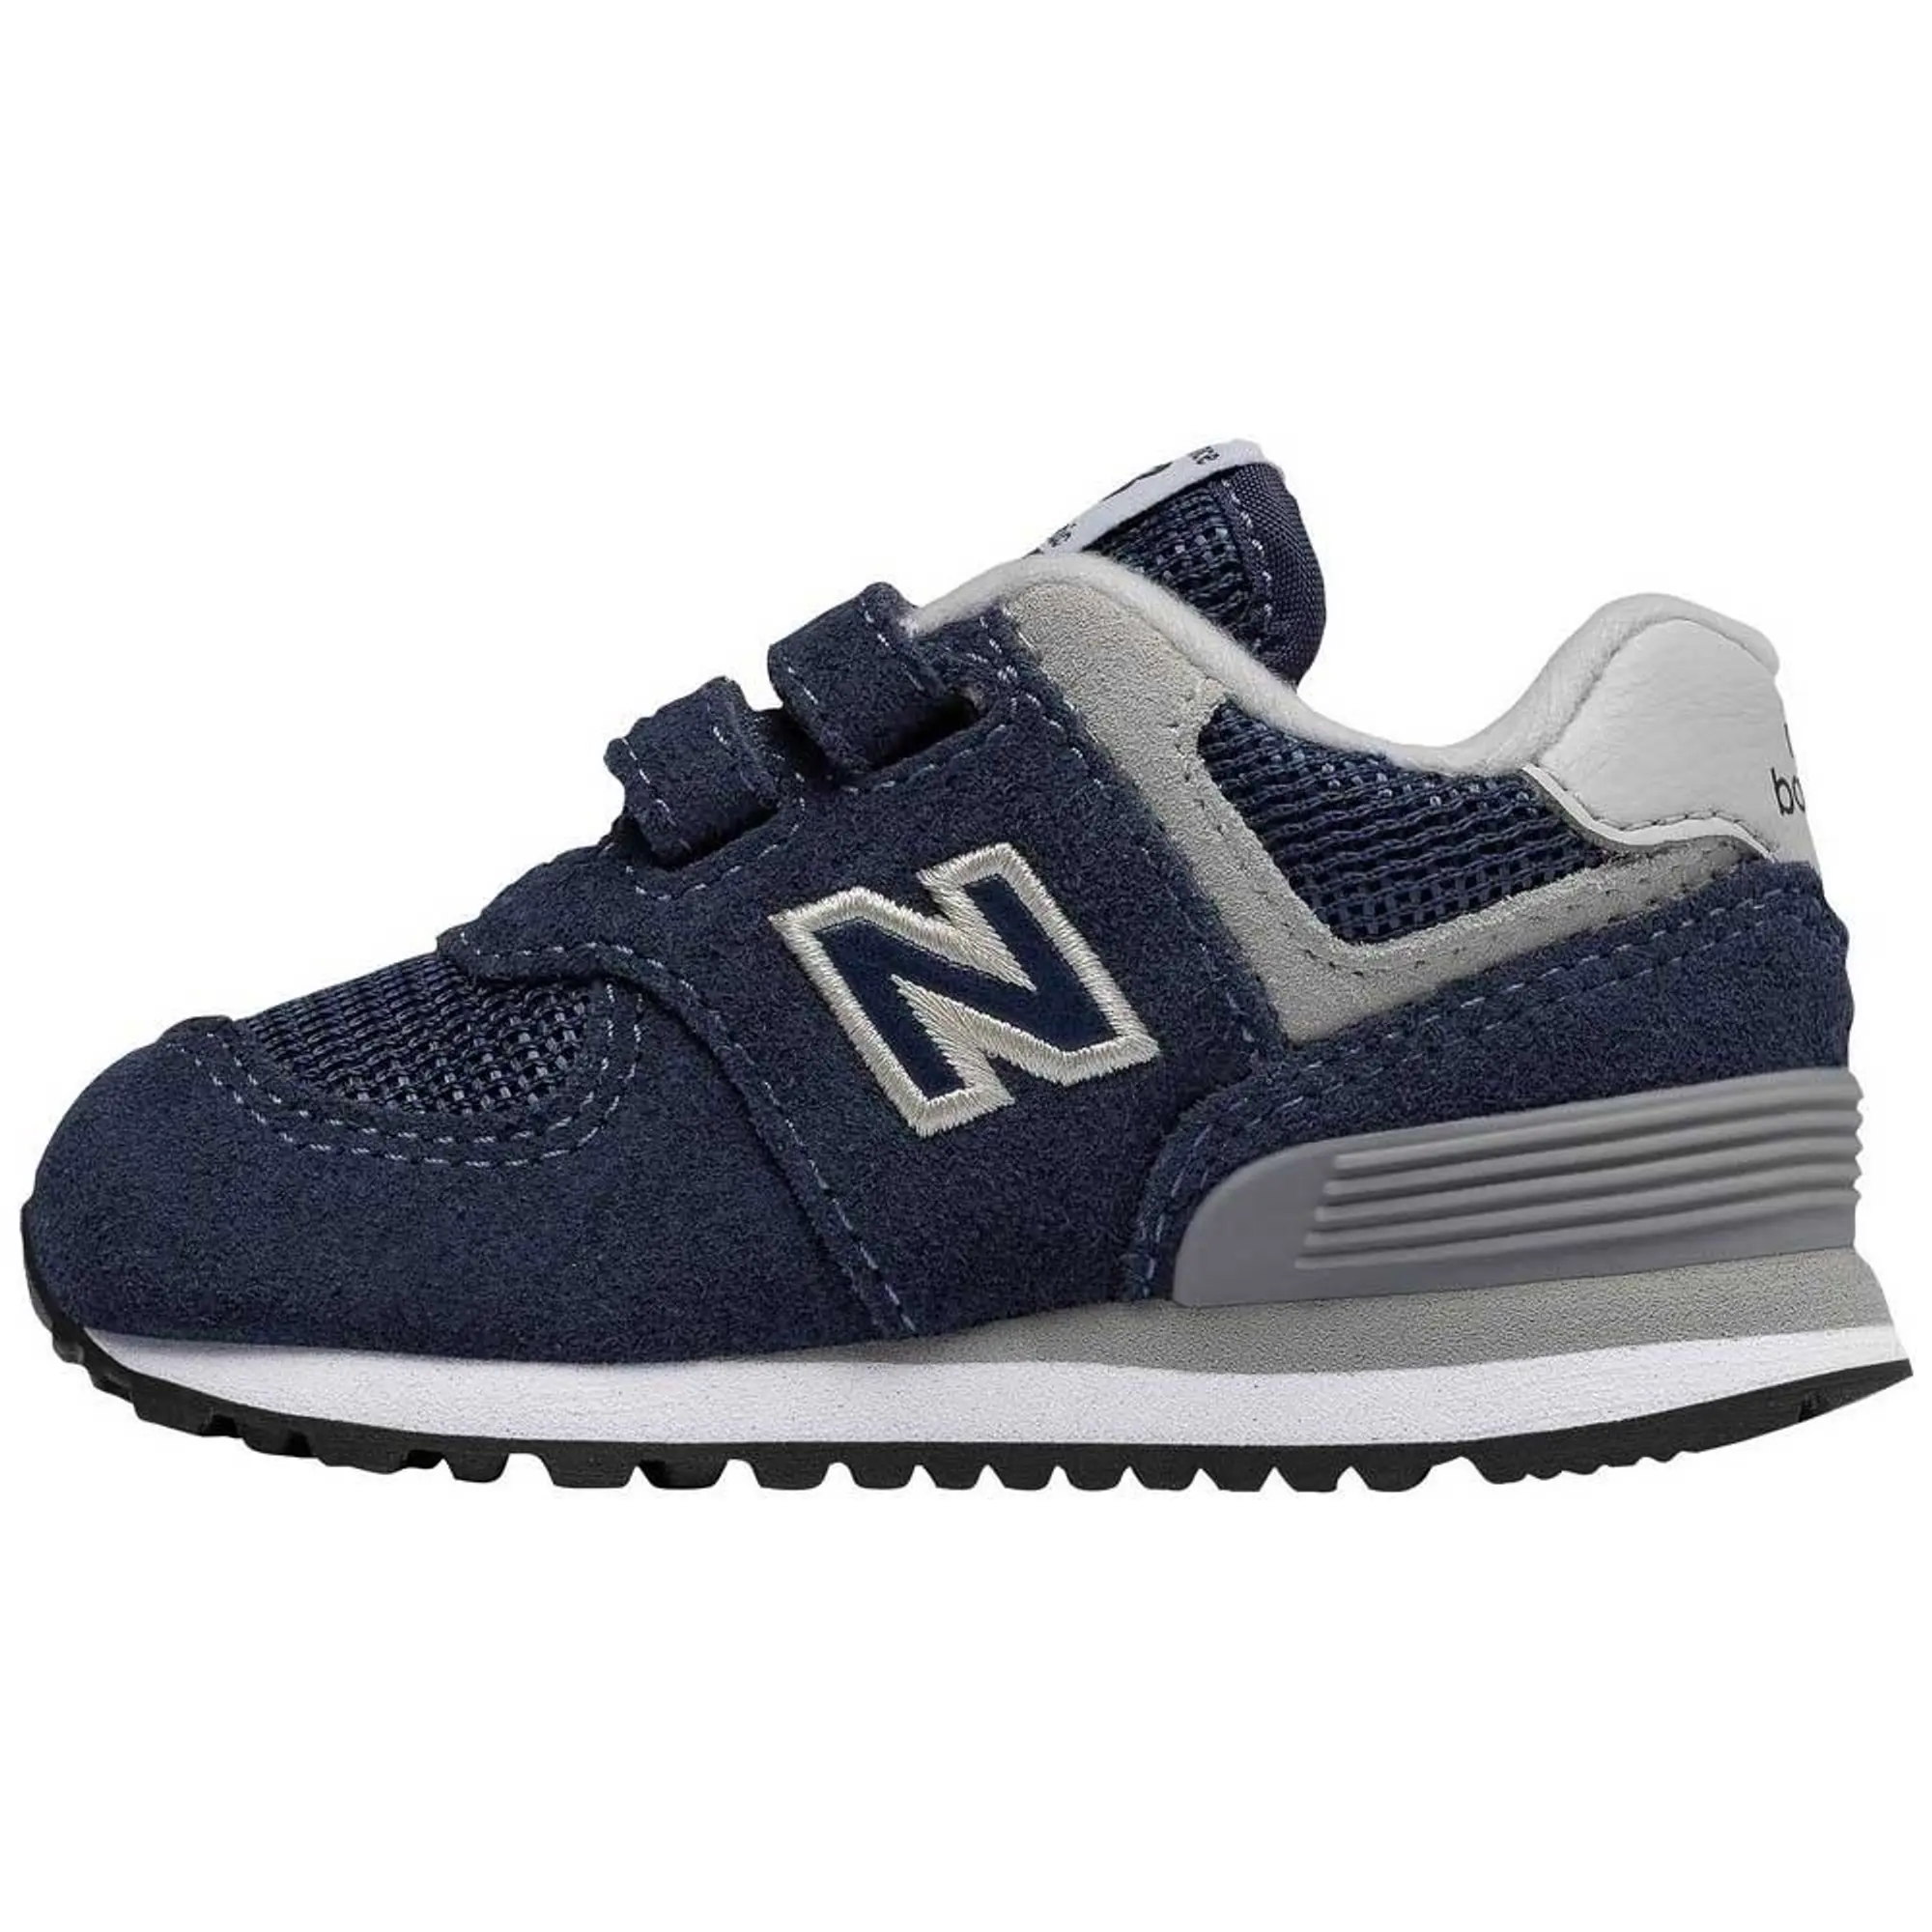 New Balance Kids' 574 Classic: Evergreen in Blue/Grey Suede/Mesh